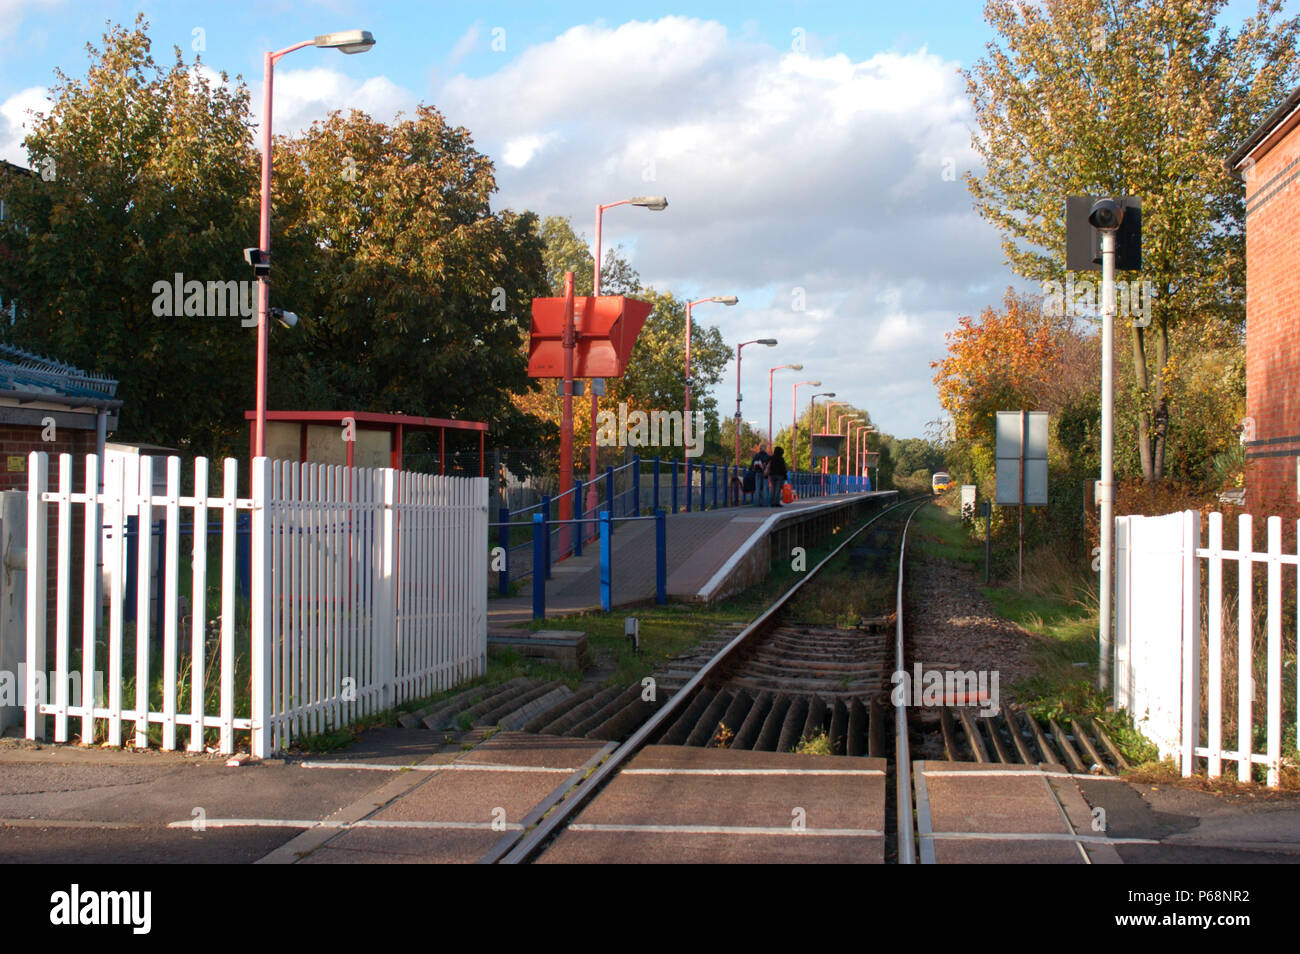 The Great Western Railway. View from road crossing at Furze Platt looking towards Marlow. October 2004. Stock Photo